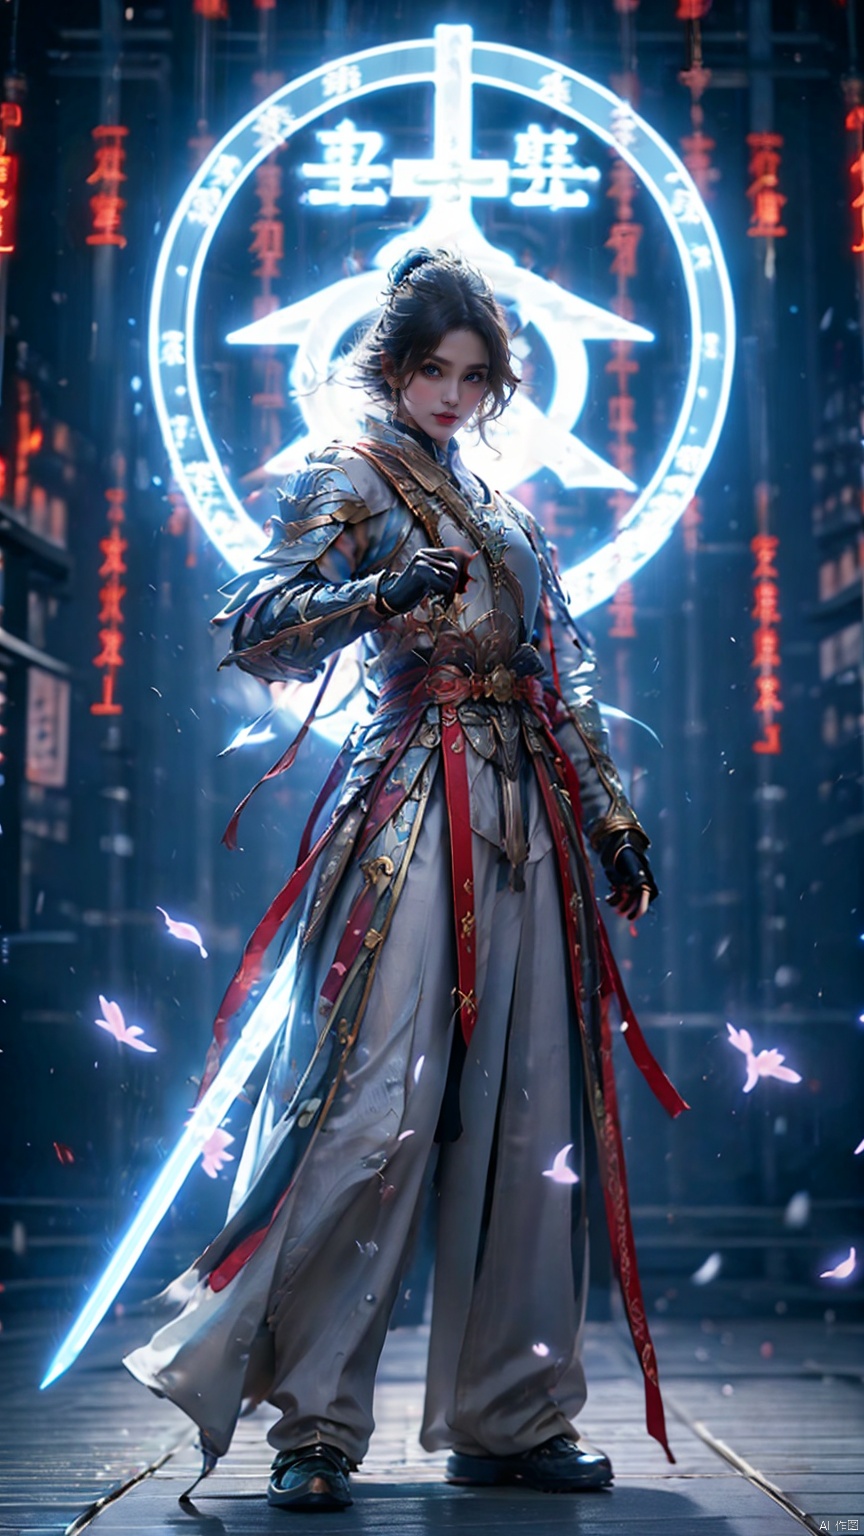 1 Girl, holding a sword, scabbard, unsheathed, blade reflective, Chinese armor, armor, Blue Eyes, Athletic Pose, Night, Outdoors, Web Digital Lighting, Neon Lights, Web Colors, Cherry Blossoms, Petals, Reflective Floor, Splash, Ripples